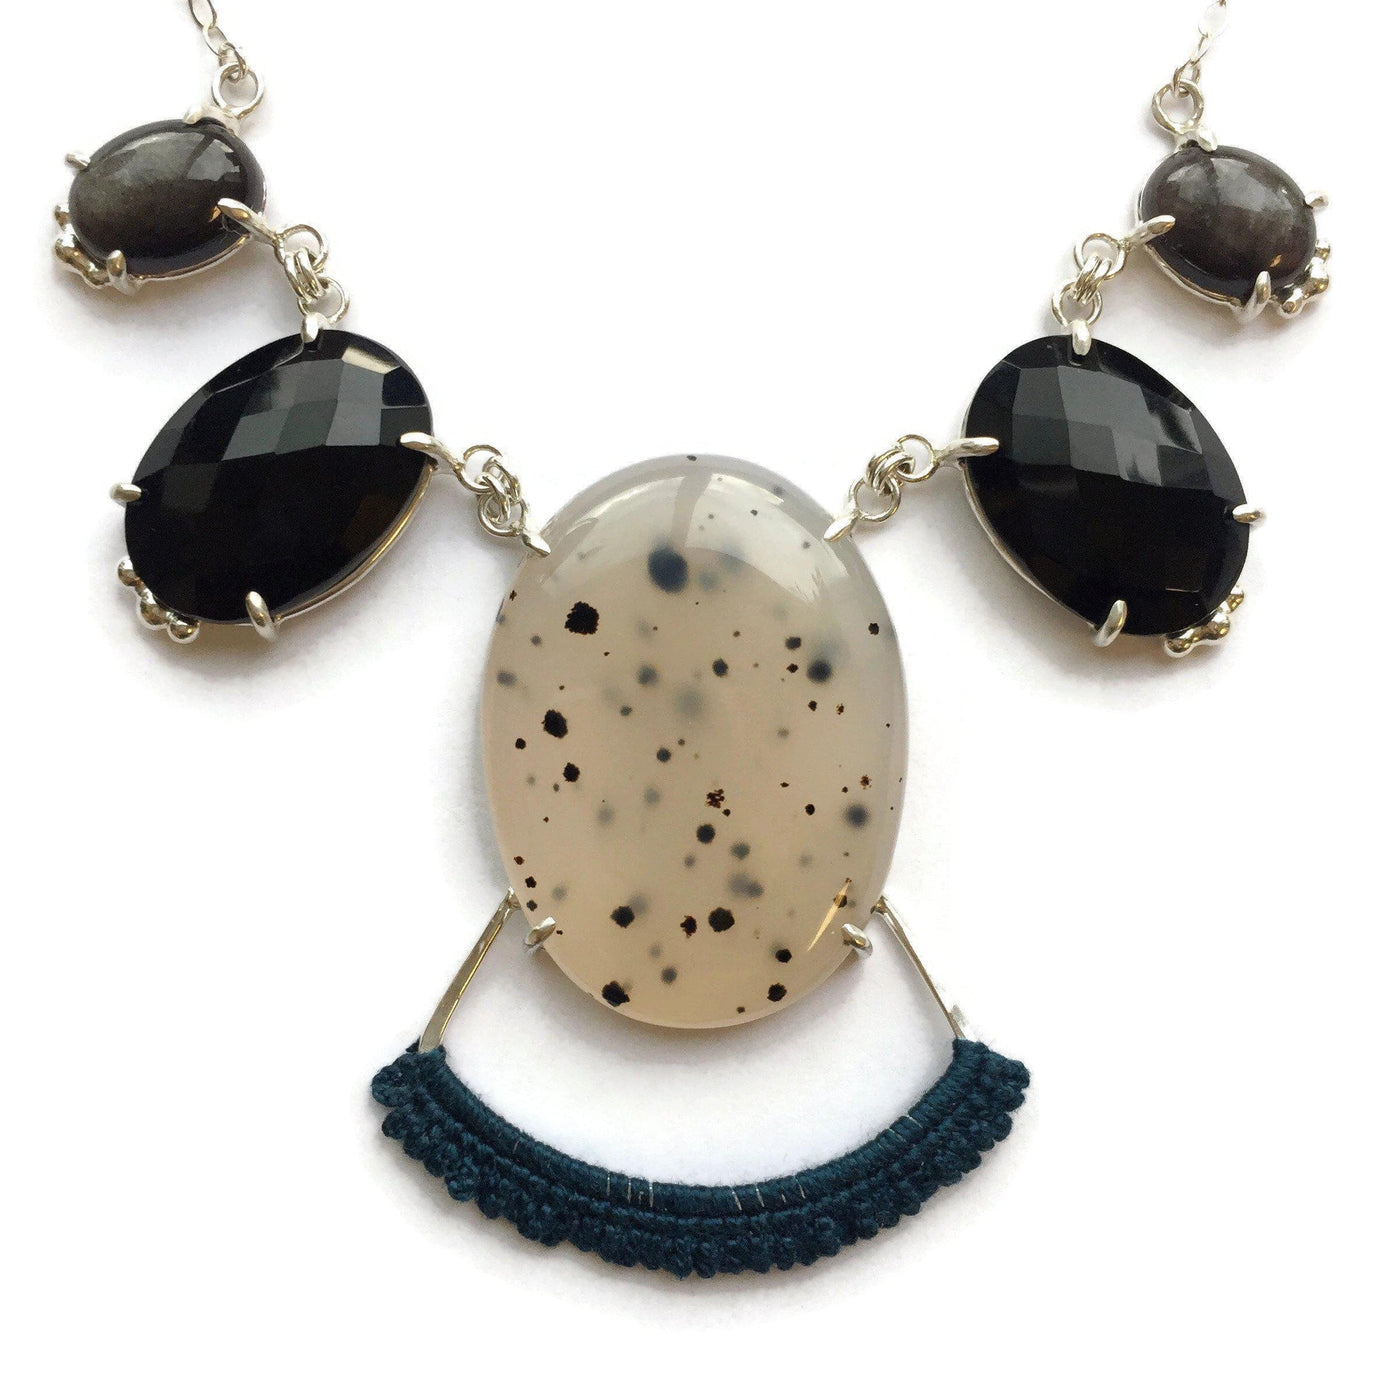 Agate, Onyx & Obsidian Statement Necklace // One-of-a-Kind-Necklaces-Twyla Dill-Seattle Jewelry-Handmade Jewelry-Seattle Jeweler-Twyla Dill